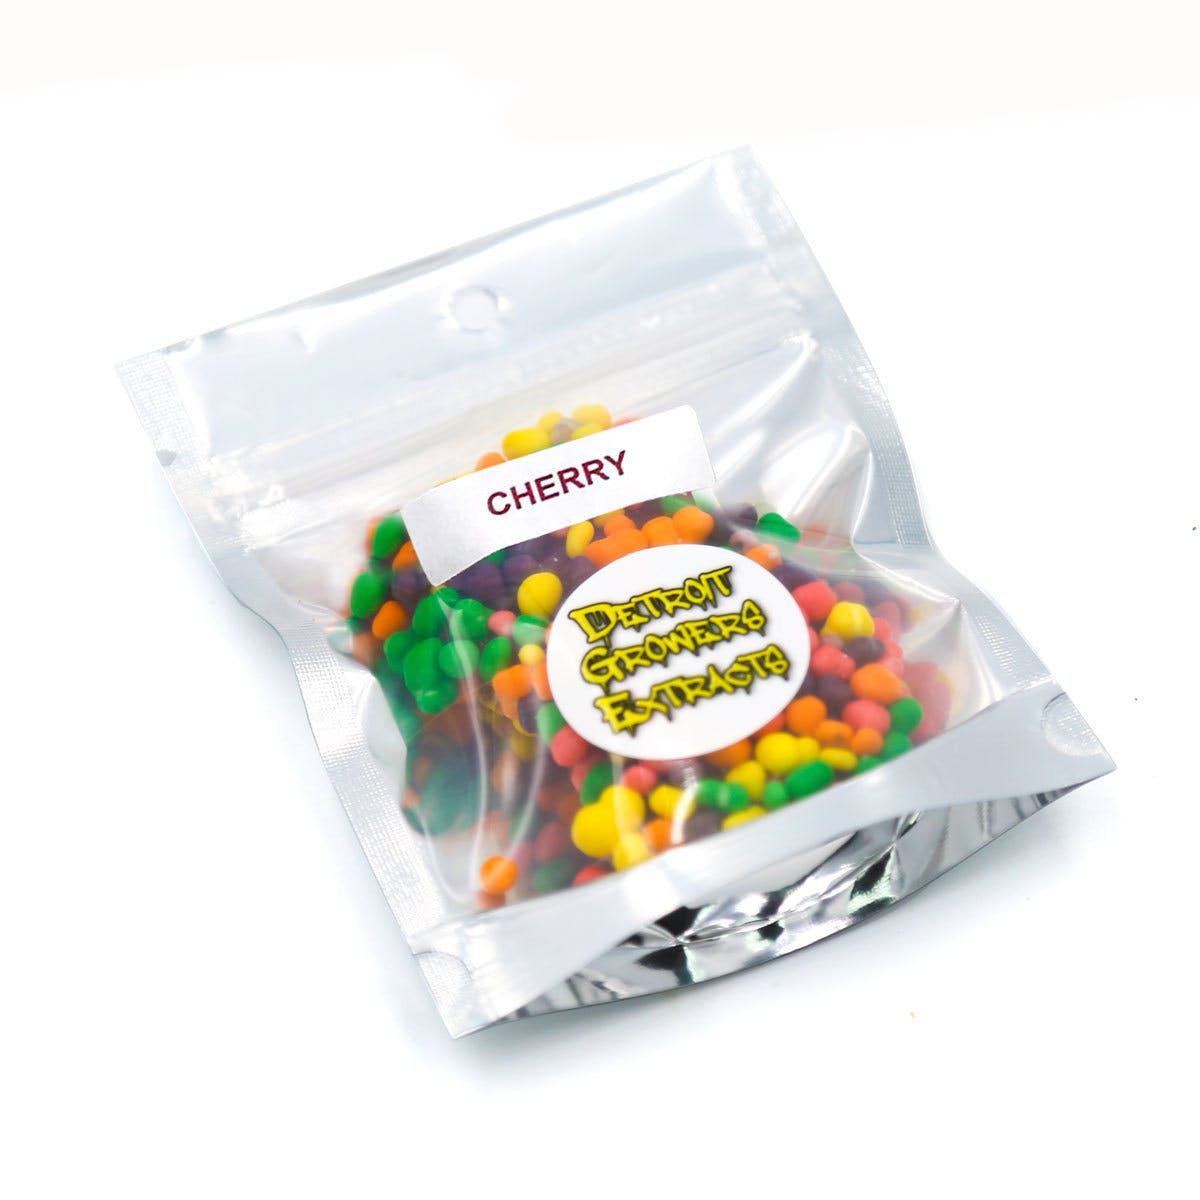 edible-detroit-growers-extracts-cherry-nerds-rope-100mg